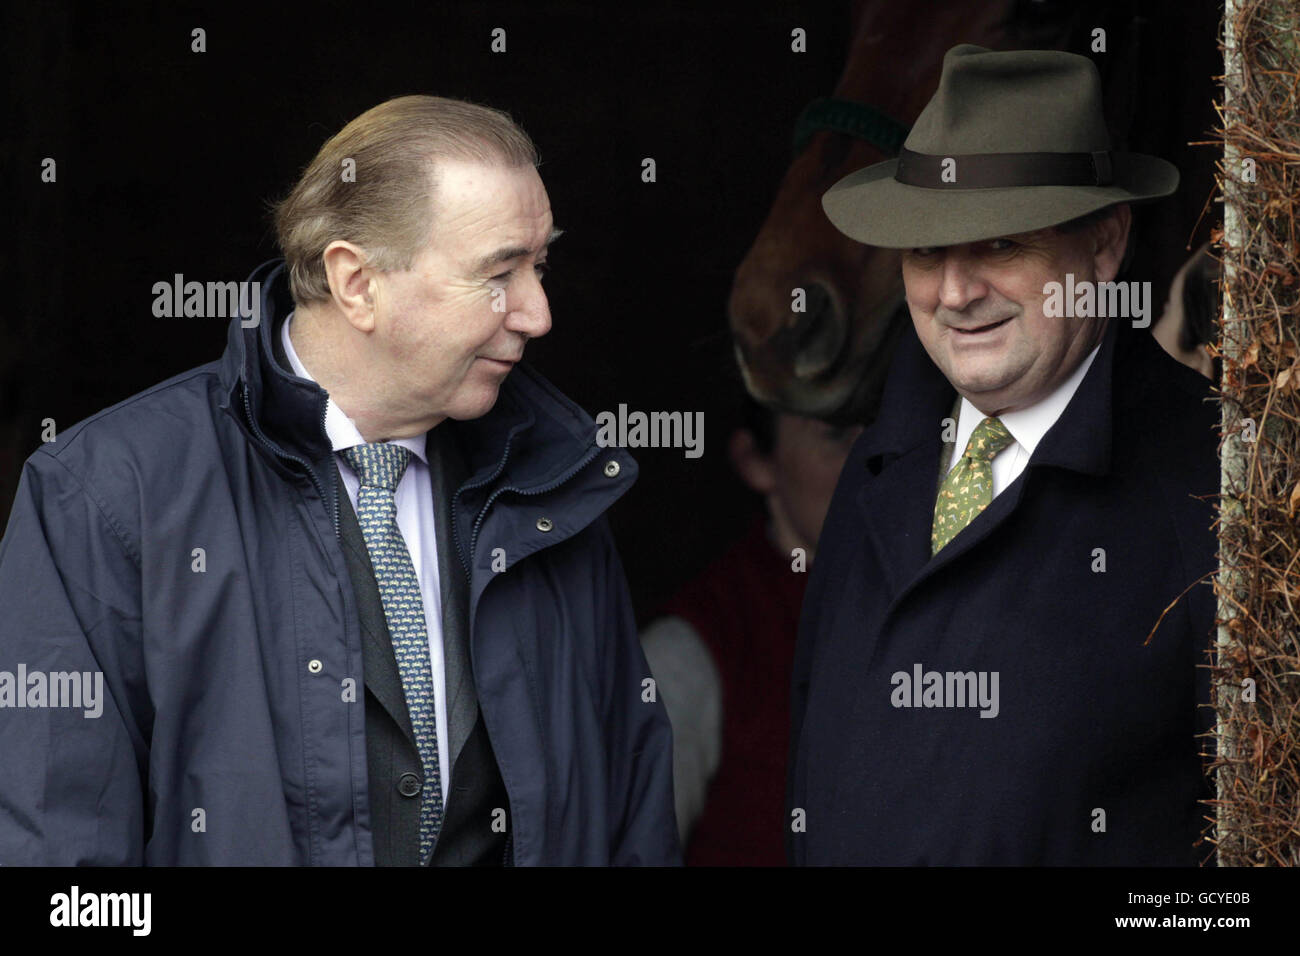 Race horse trainers Dermot Weld (left) and Noel Meade during the Bord na Mona Day of the Christmas Festival at Leopardstown Racecourse, Dublin, Ireland. Stock Photo